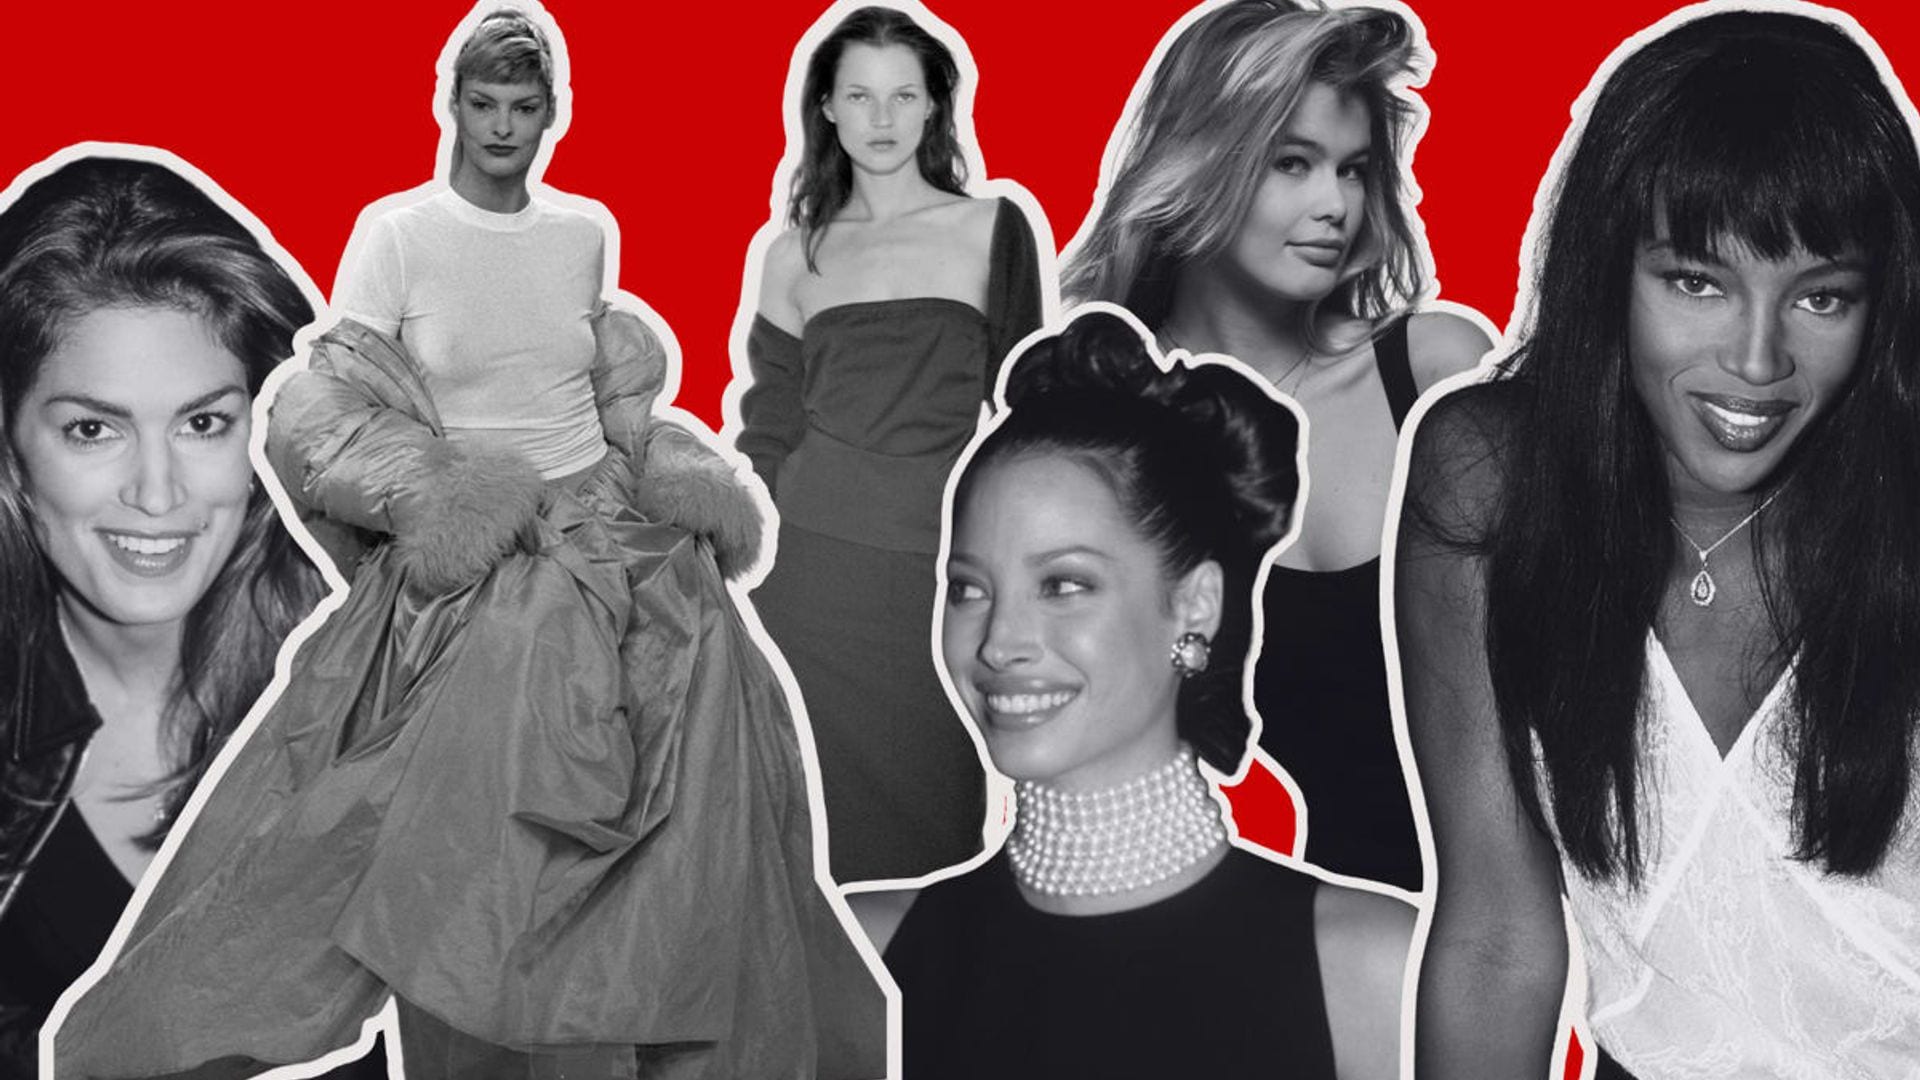 The 90’s supermodels who redefined the concept of beauty